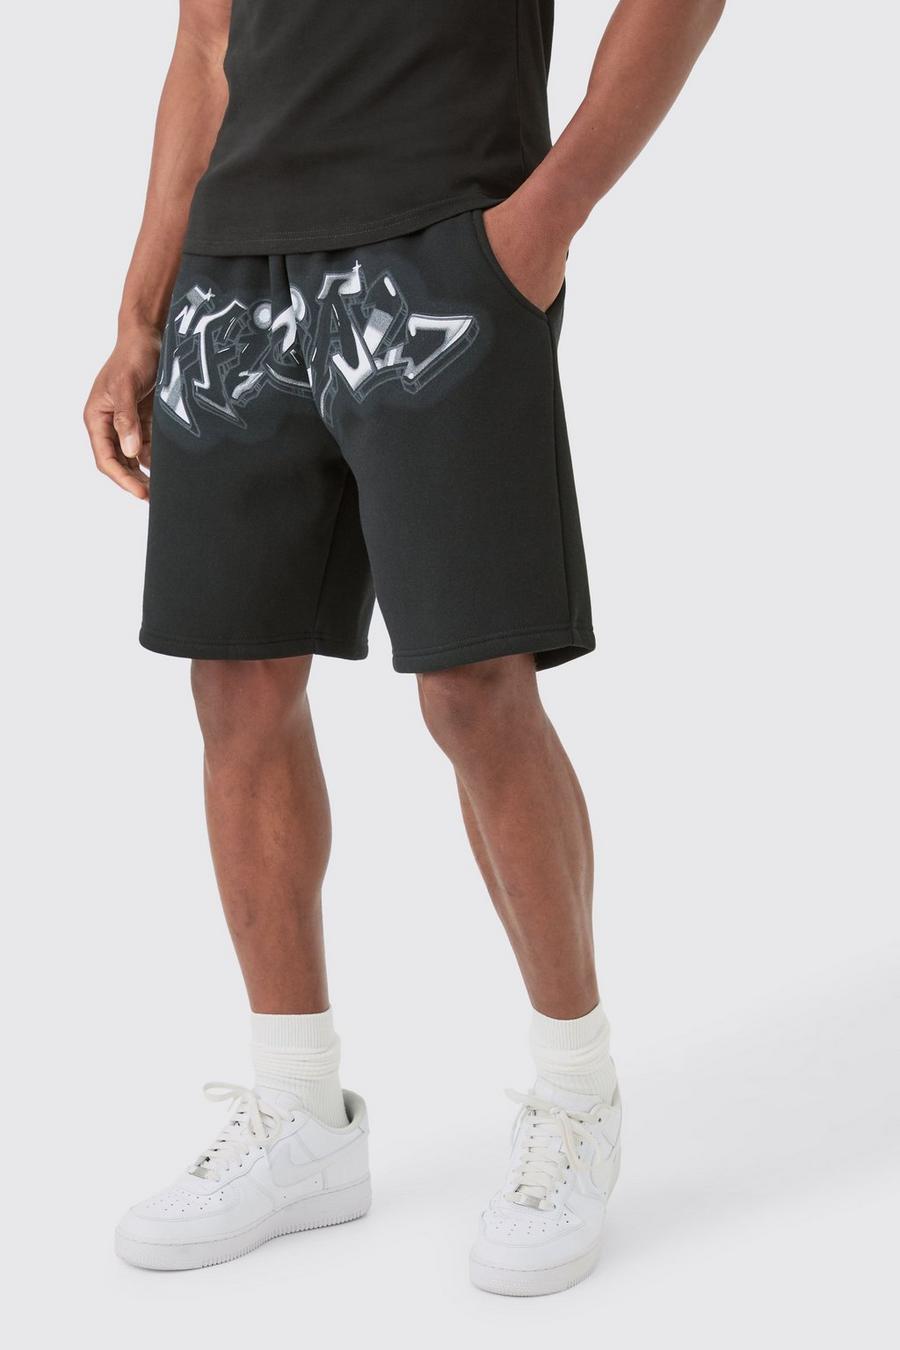 Black Relaxed Fit Official Graffiti Spray Shorts